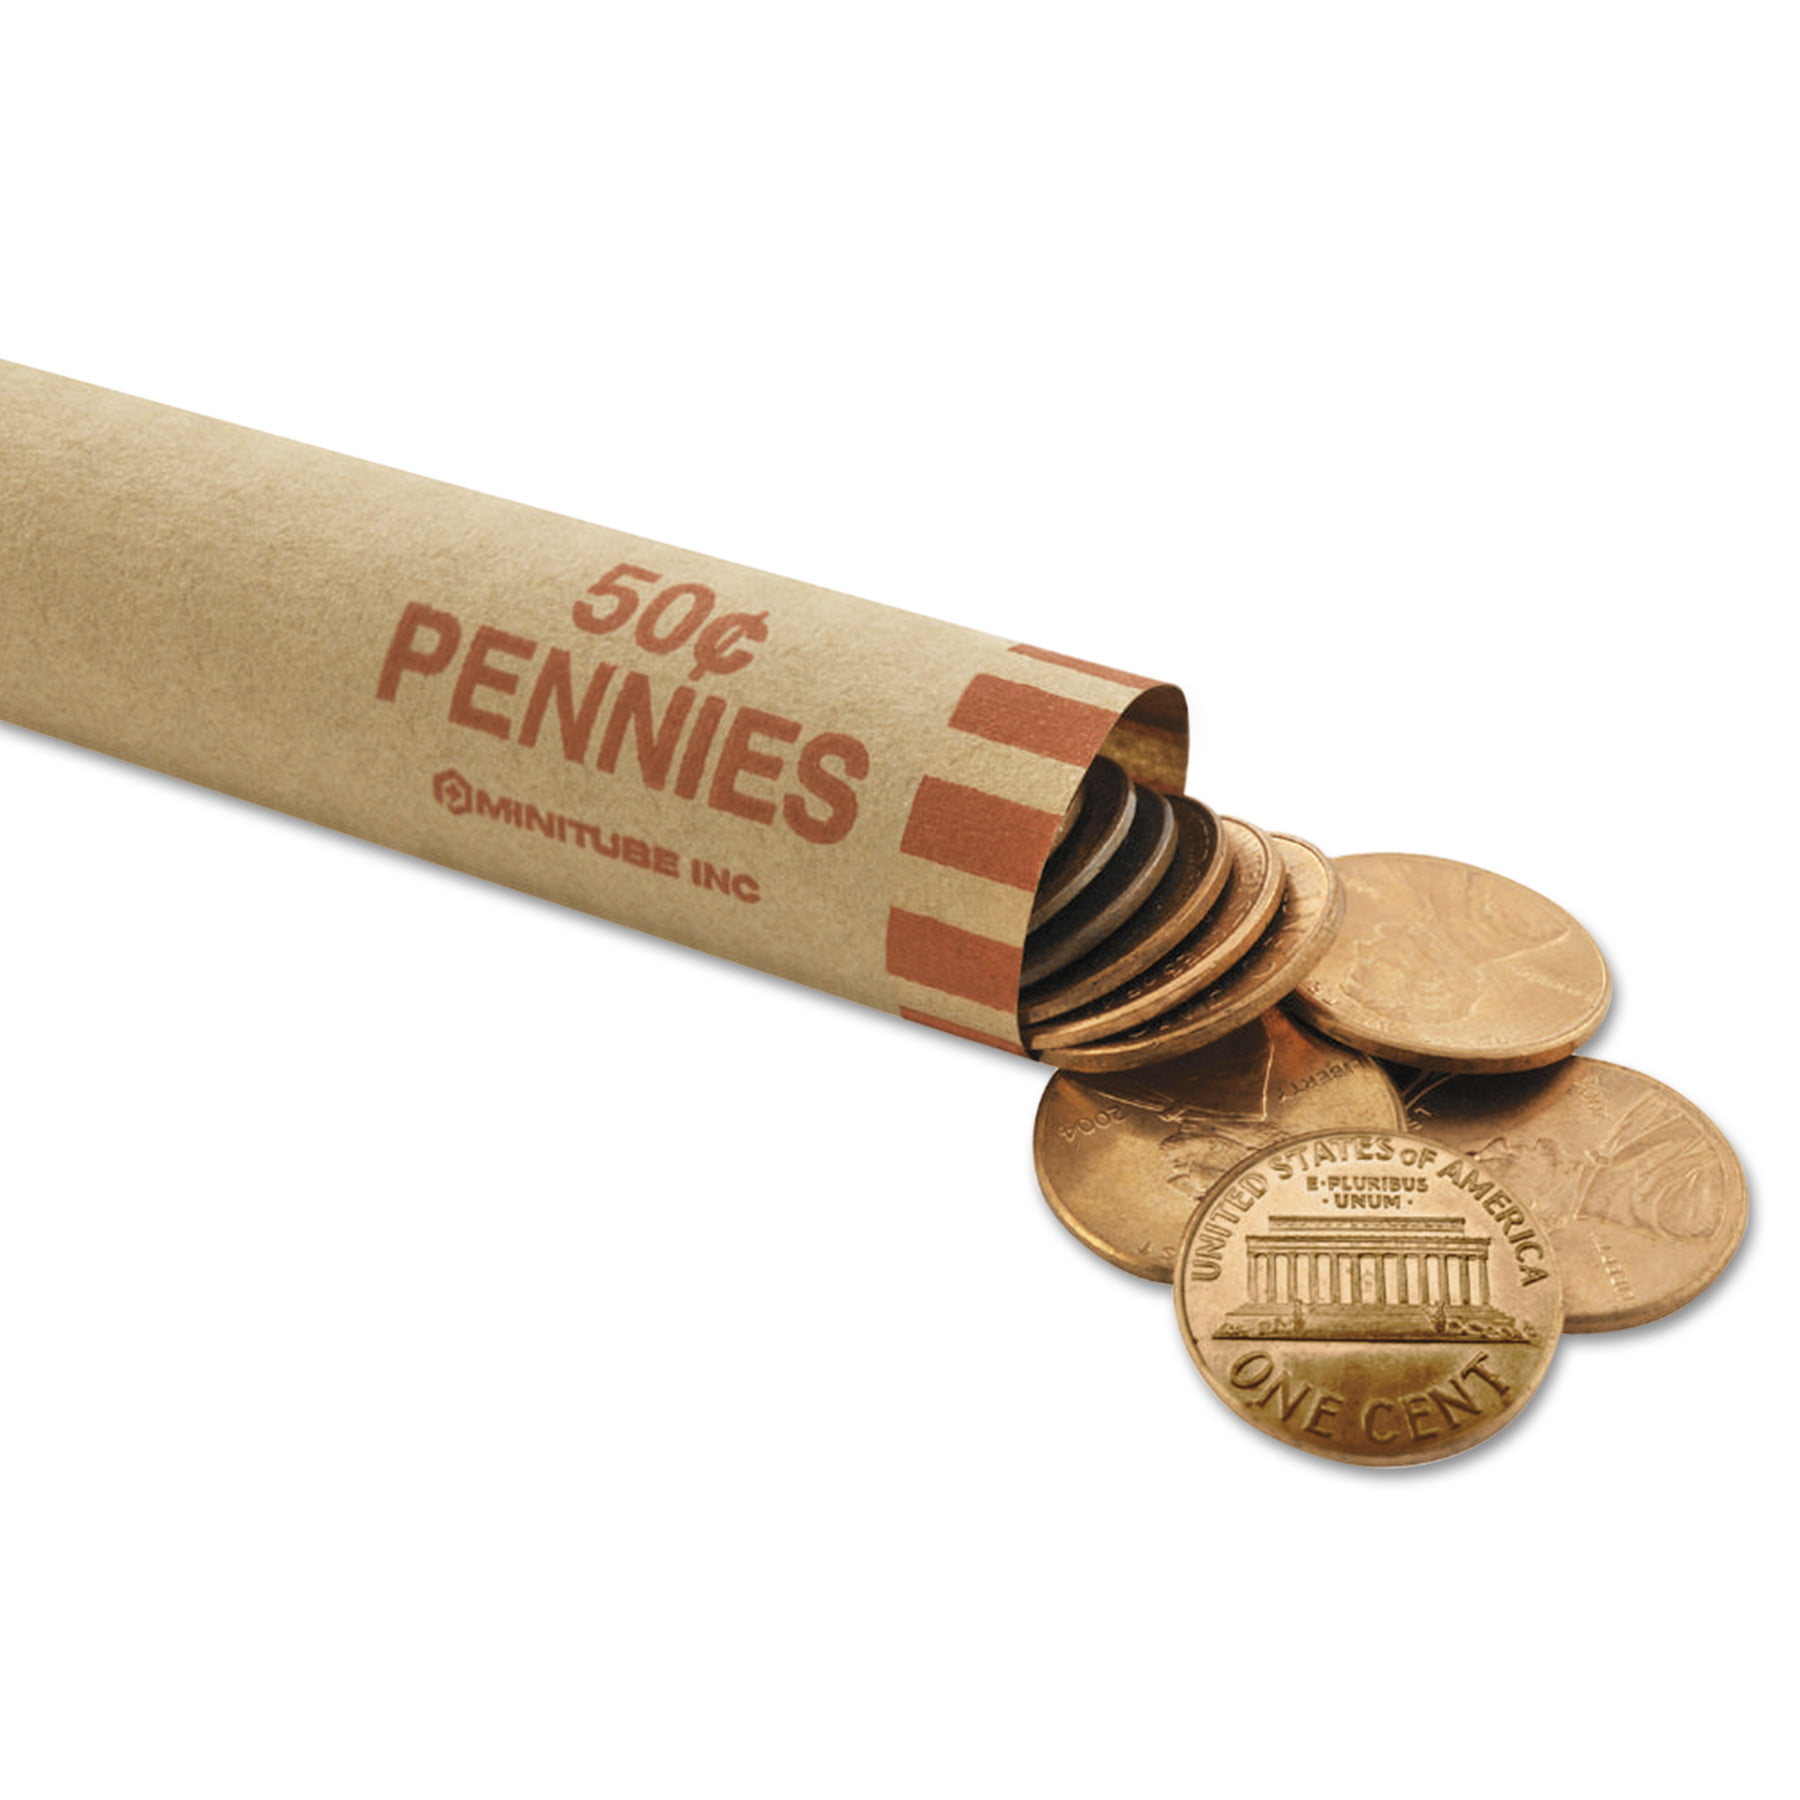 mmf-industries-nested-preformed-coin-wrappers-pennies-50-red-1000-wrappers-box-walmart